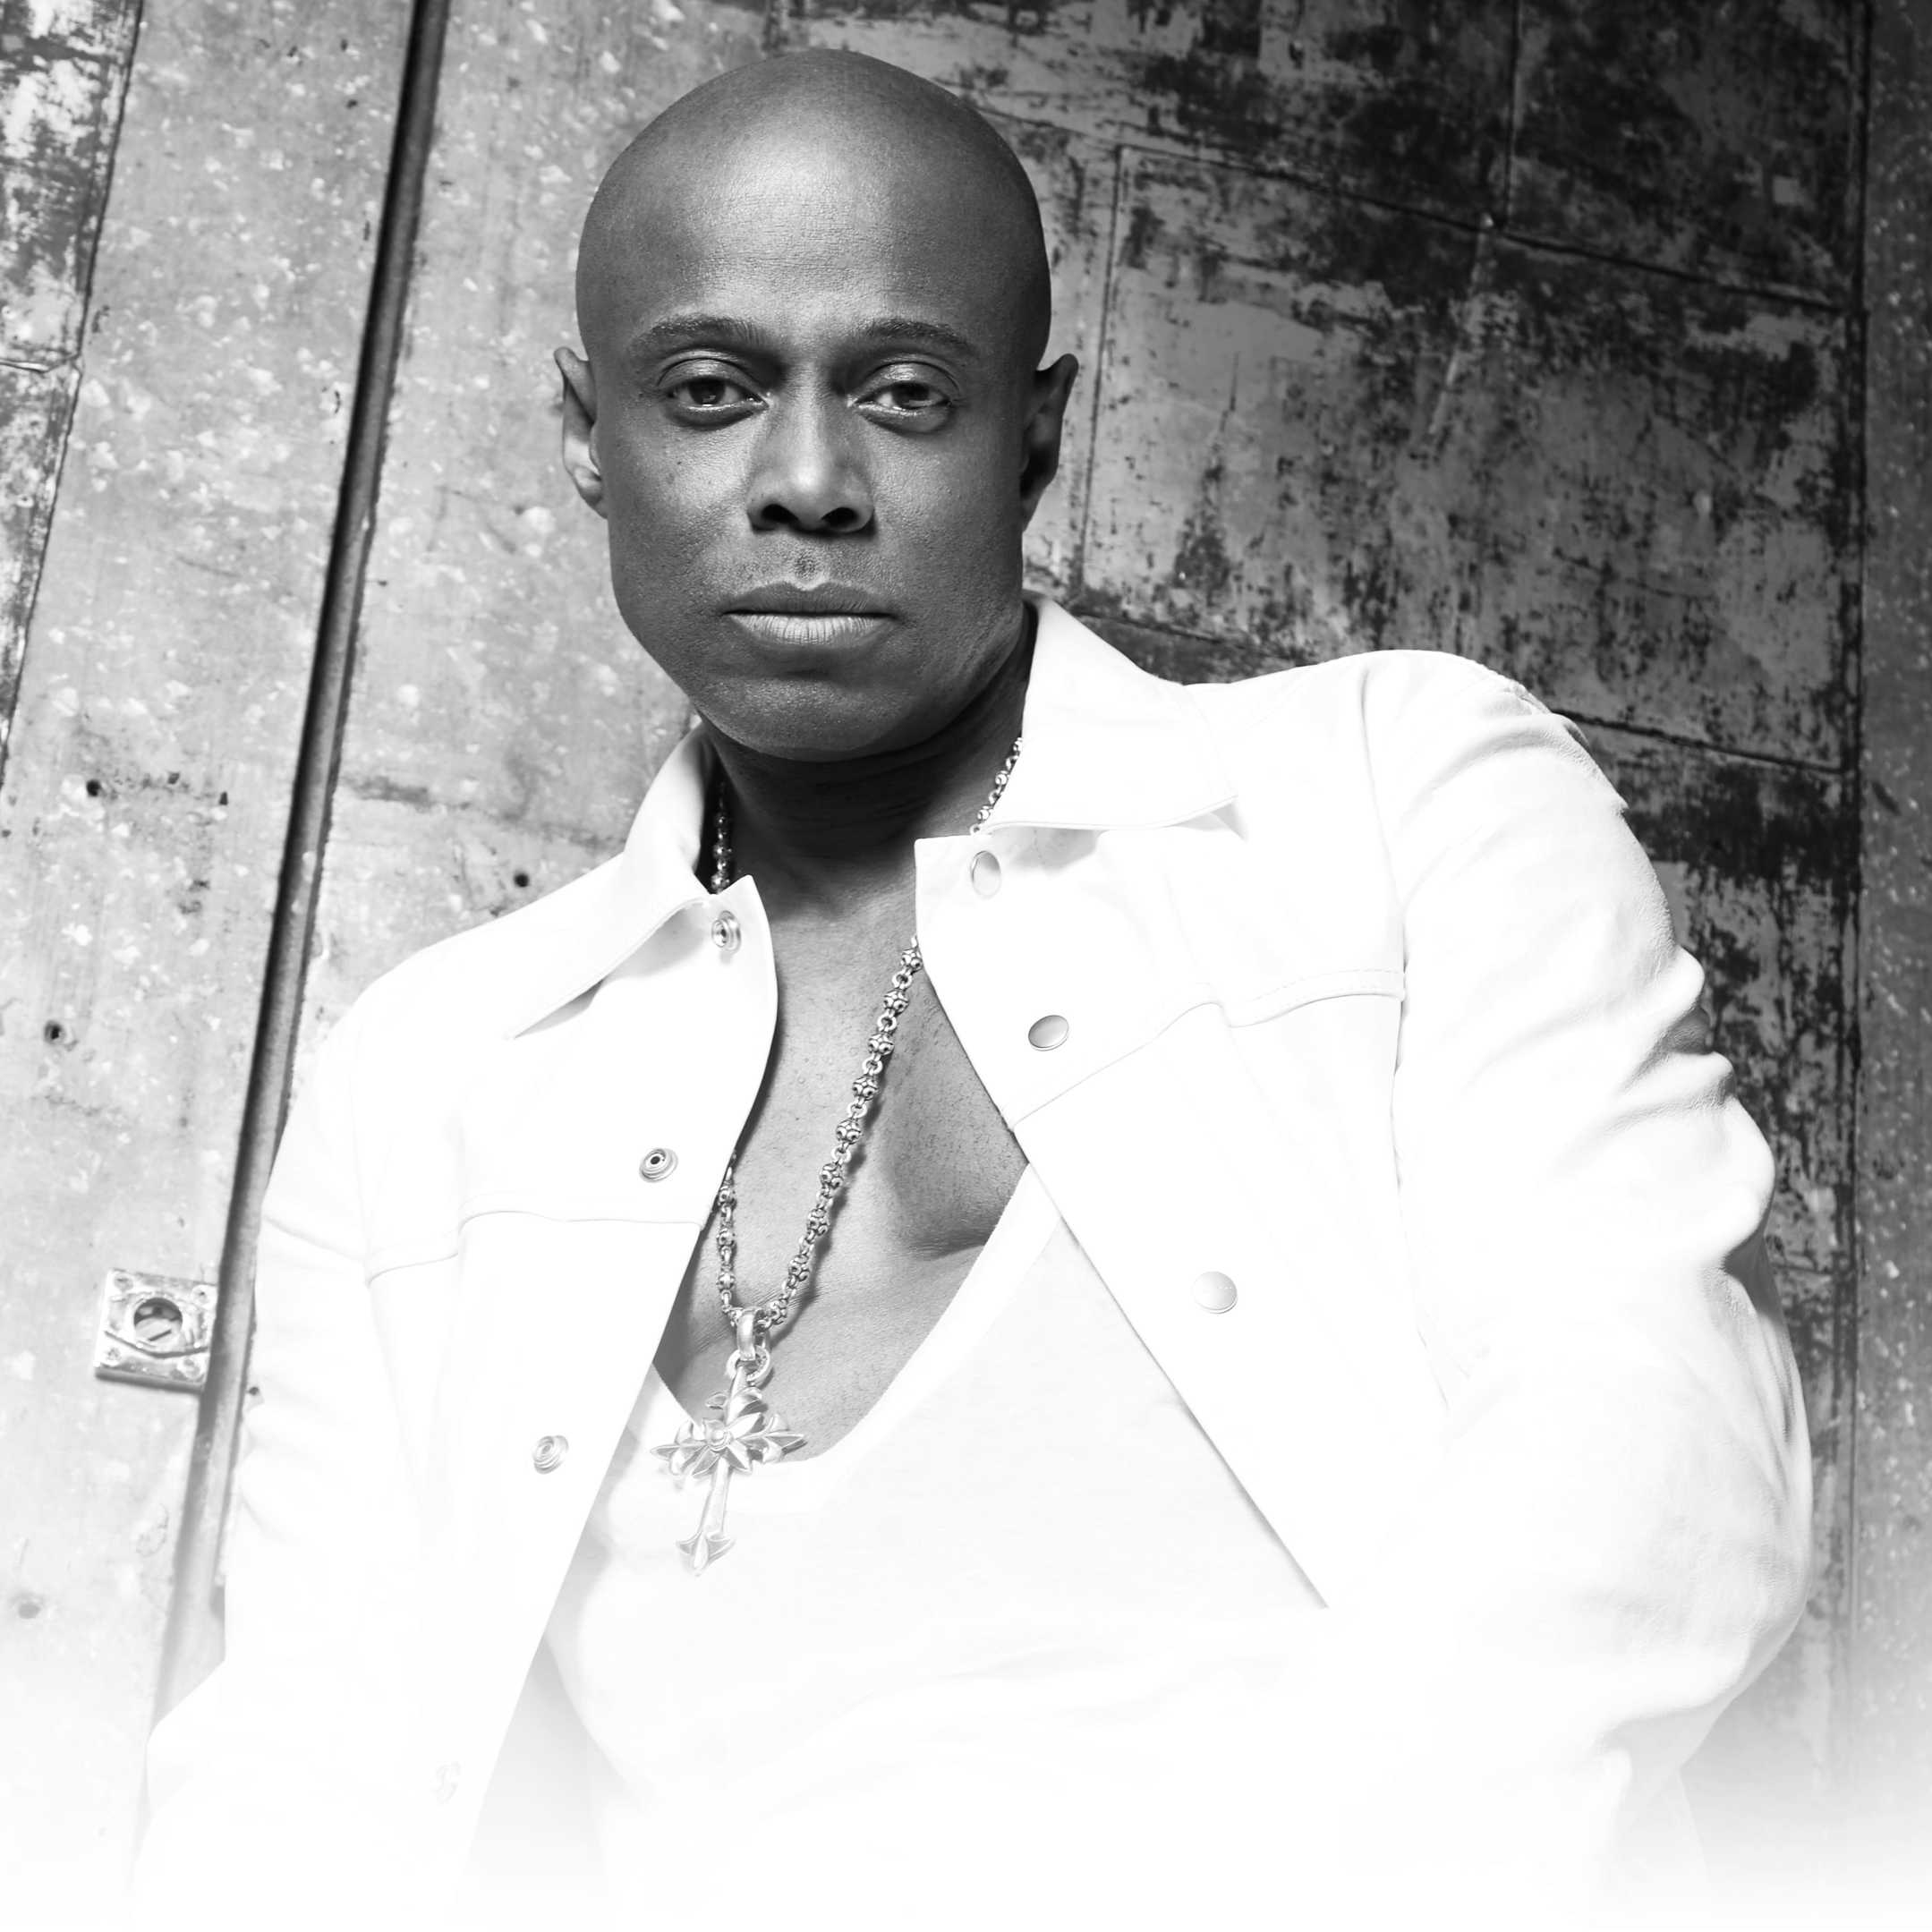 Singer, Songwriter and Producer Kem on the cover of his single “Lie To Me”